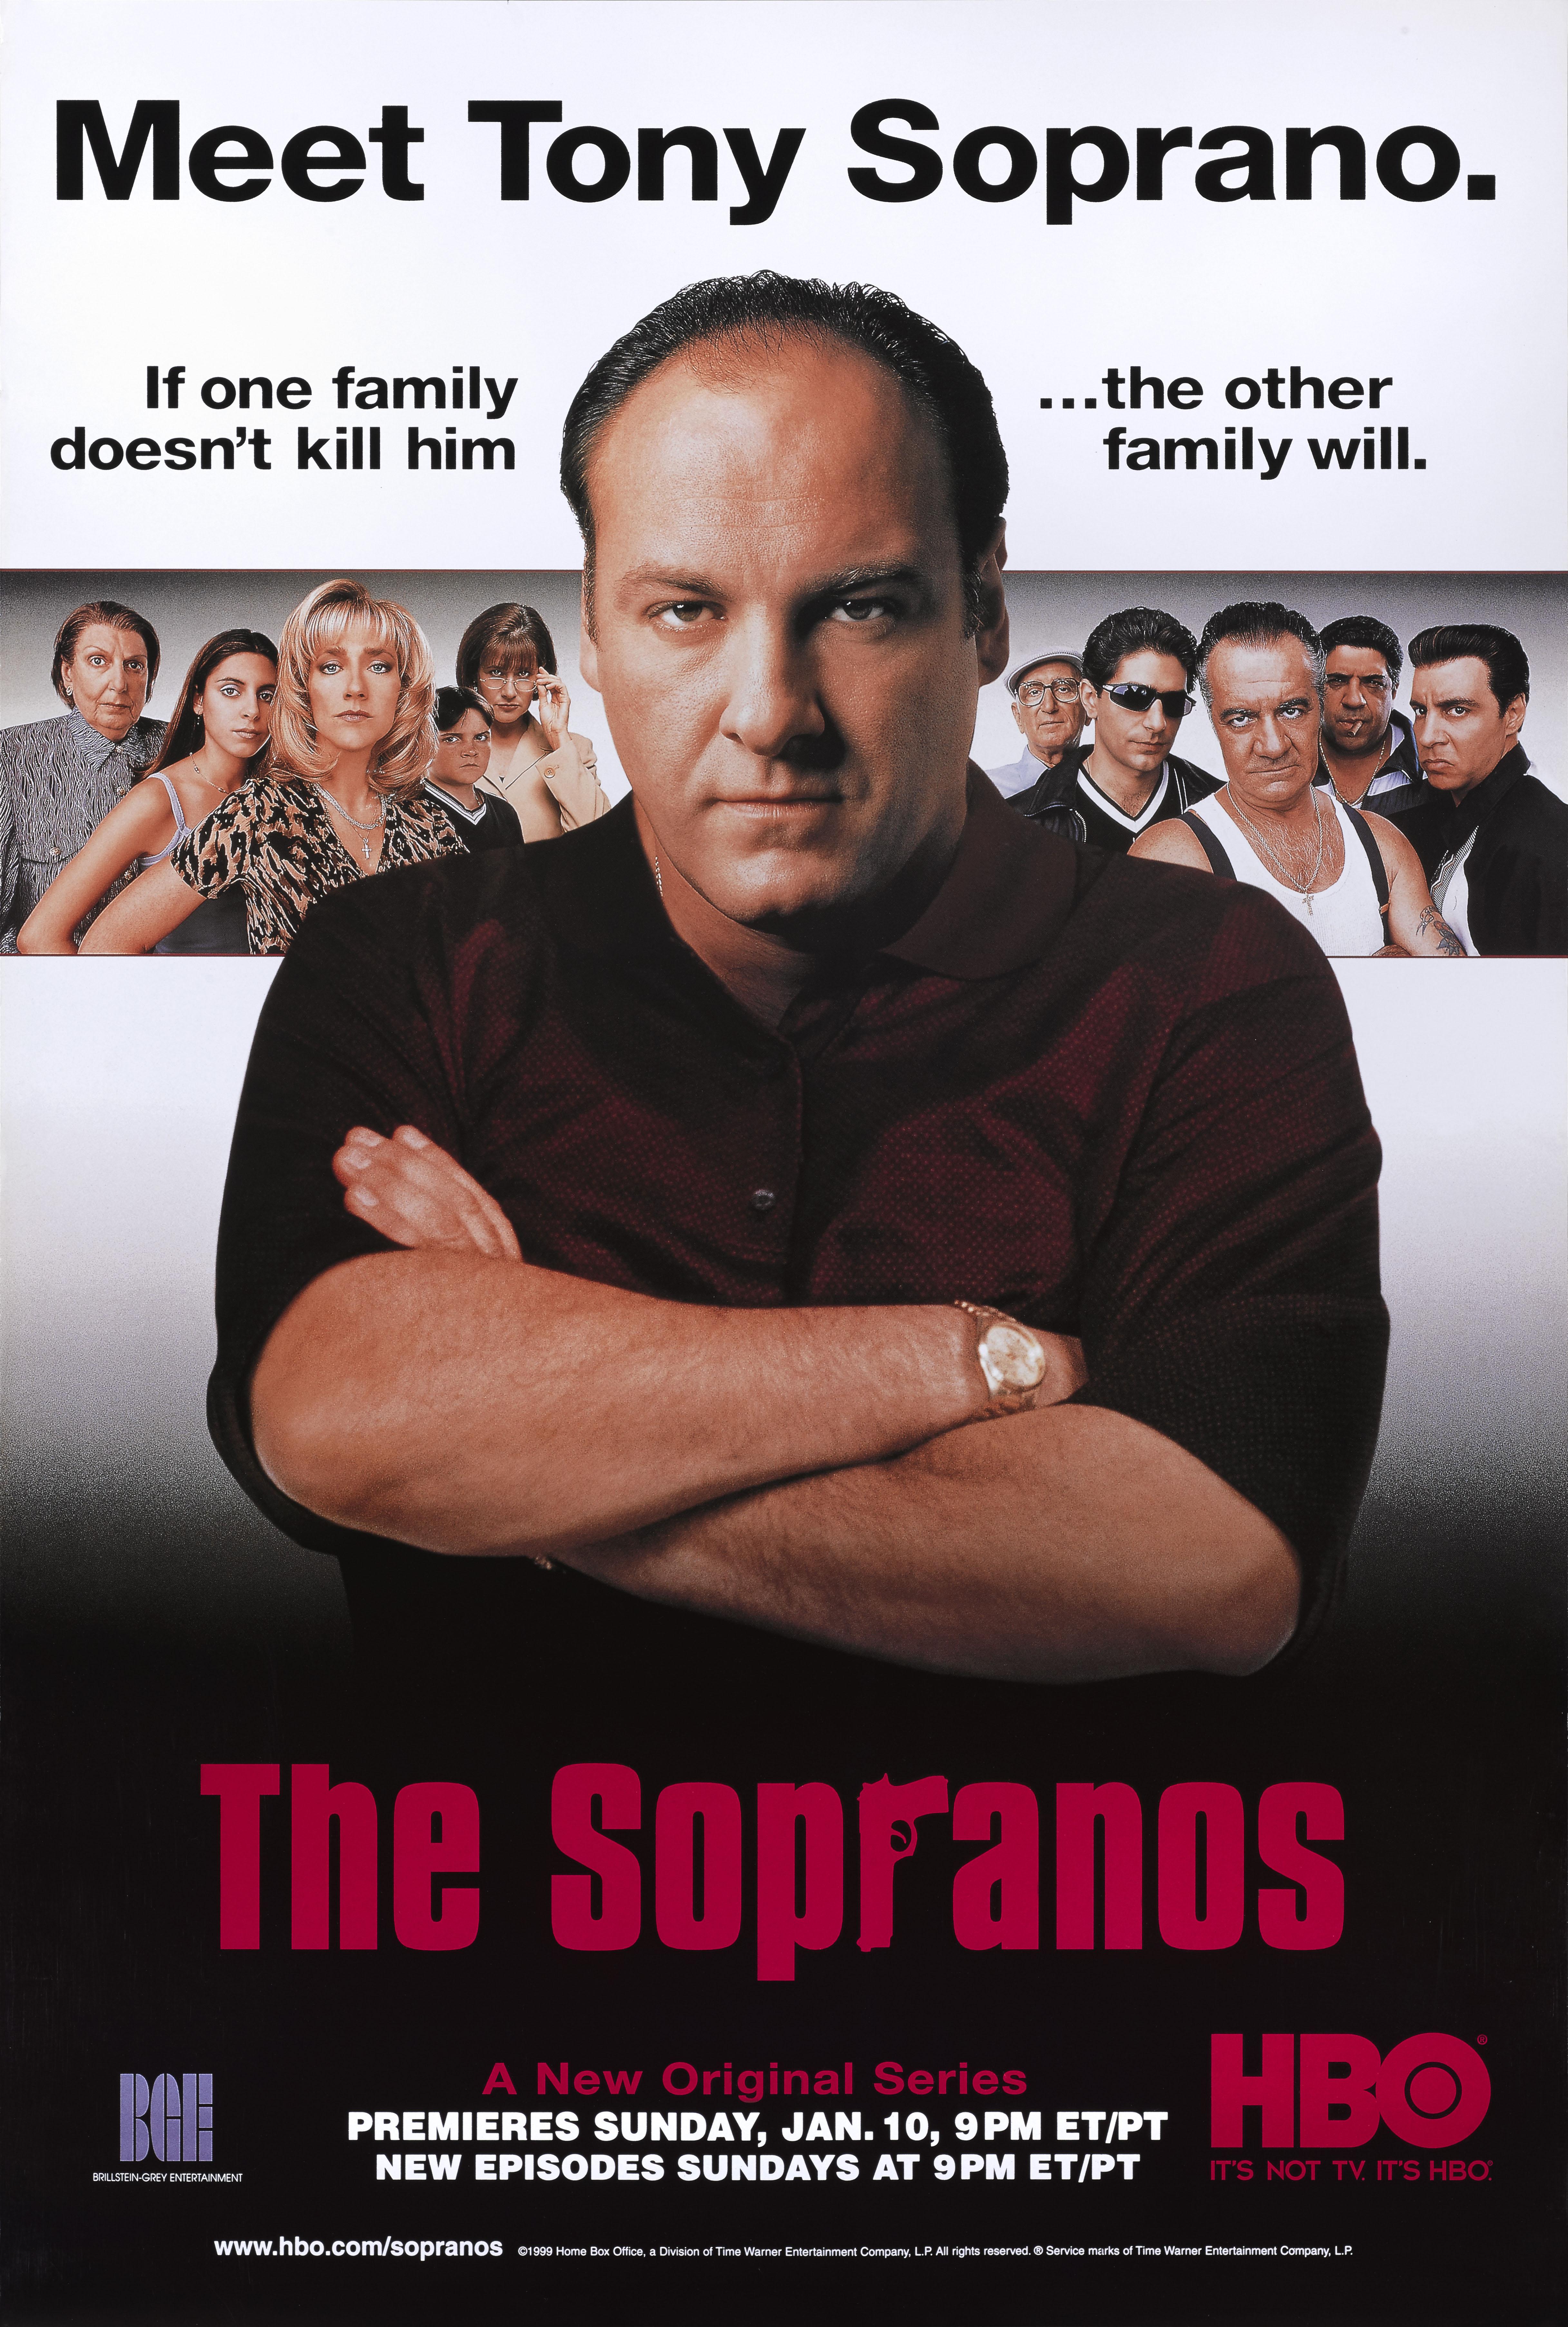 sopranos pictures for sale